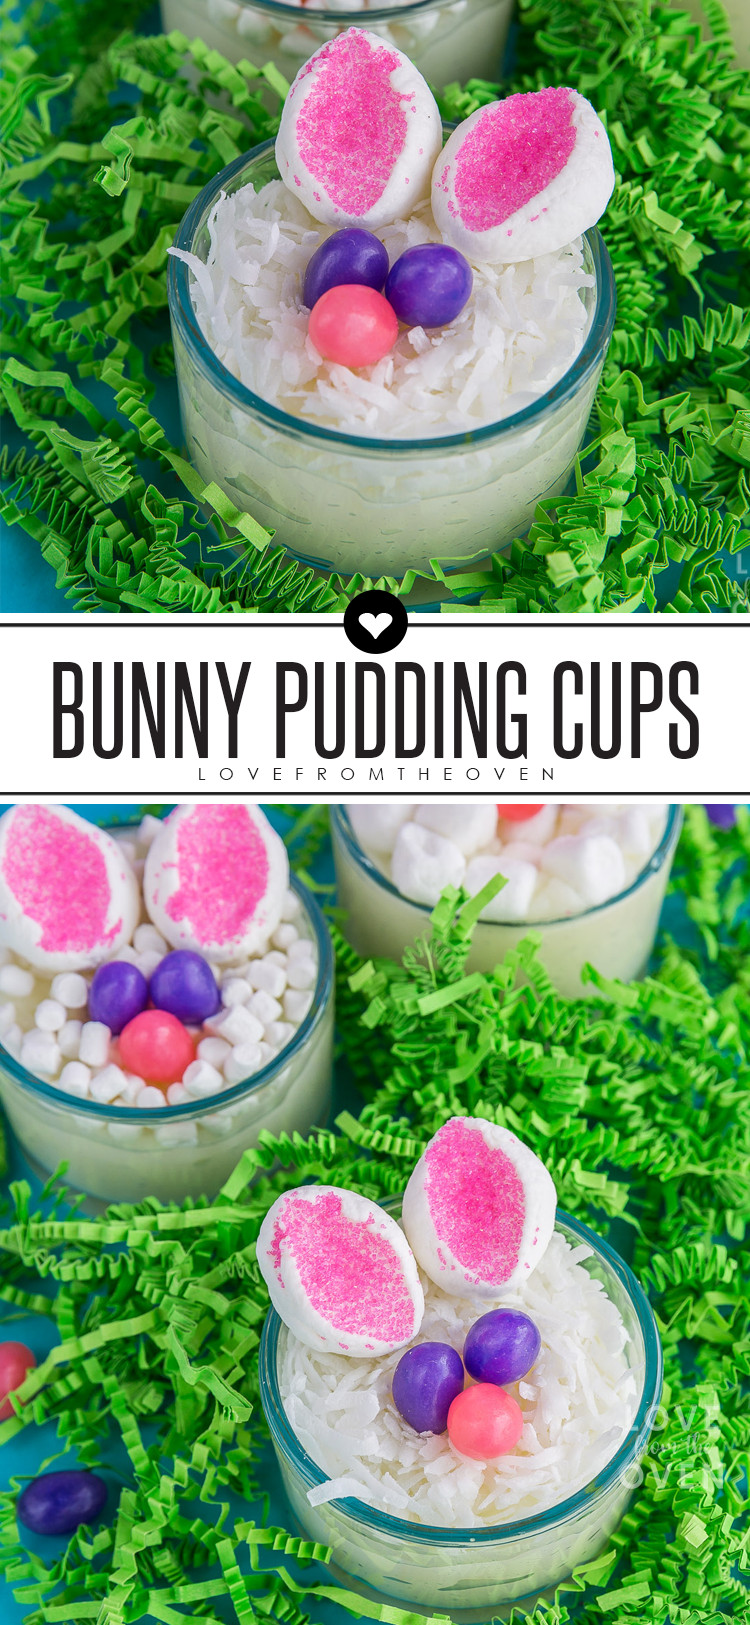 Cute Easter Desserts Recipes
 Easy Easter Bunny Pudding Cups A cute and easy Easter